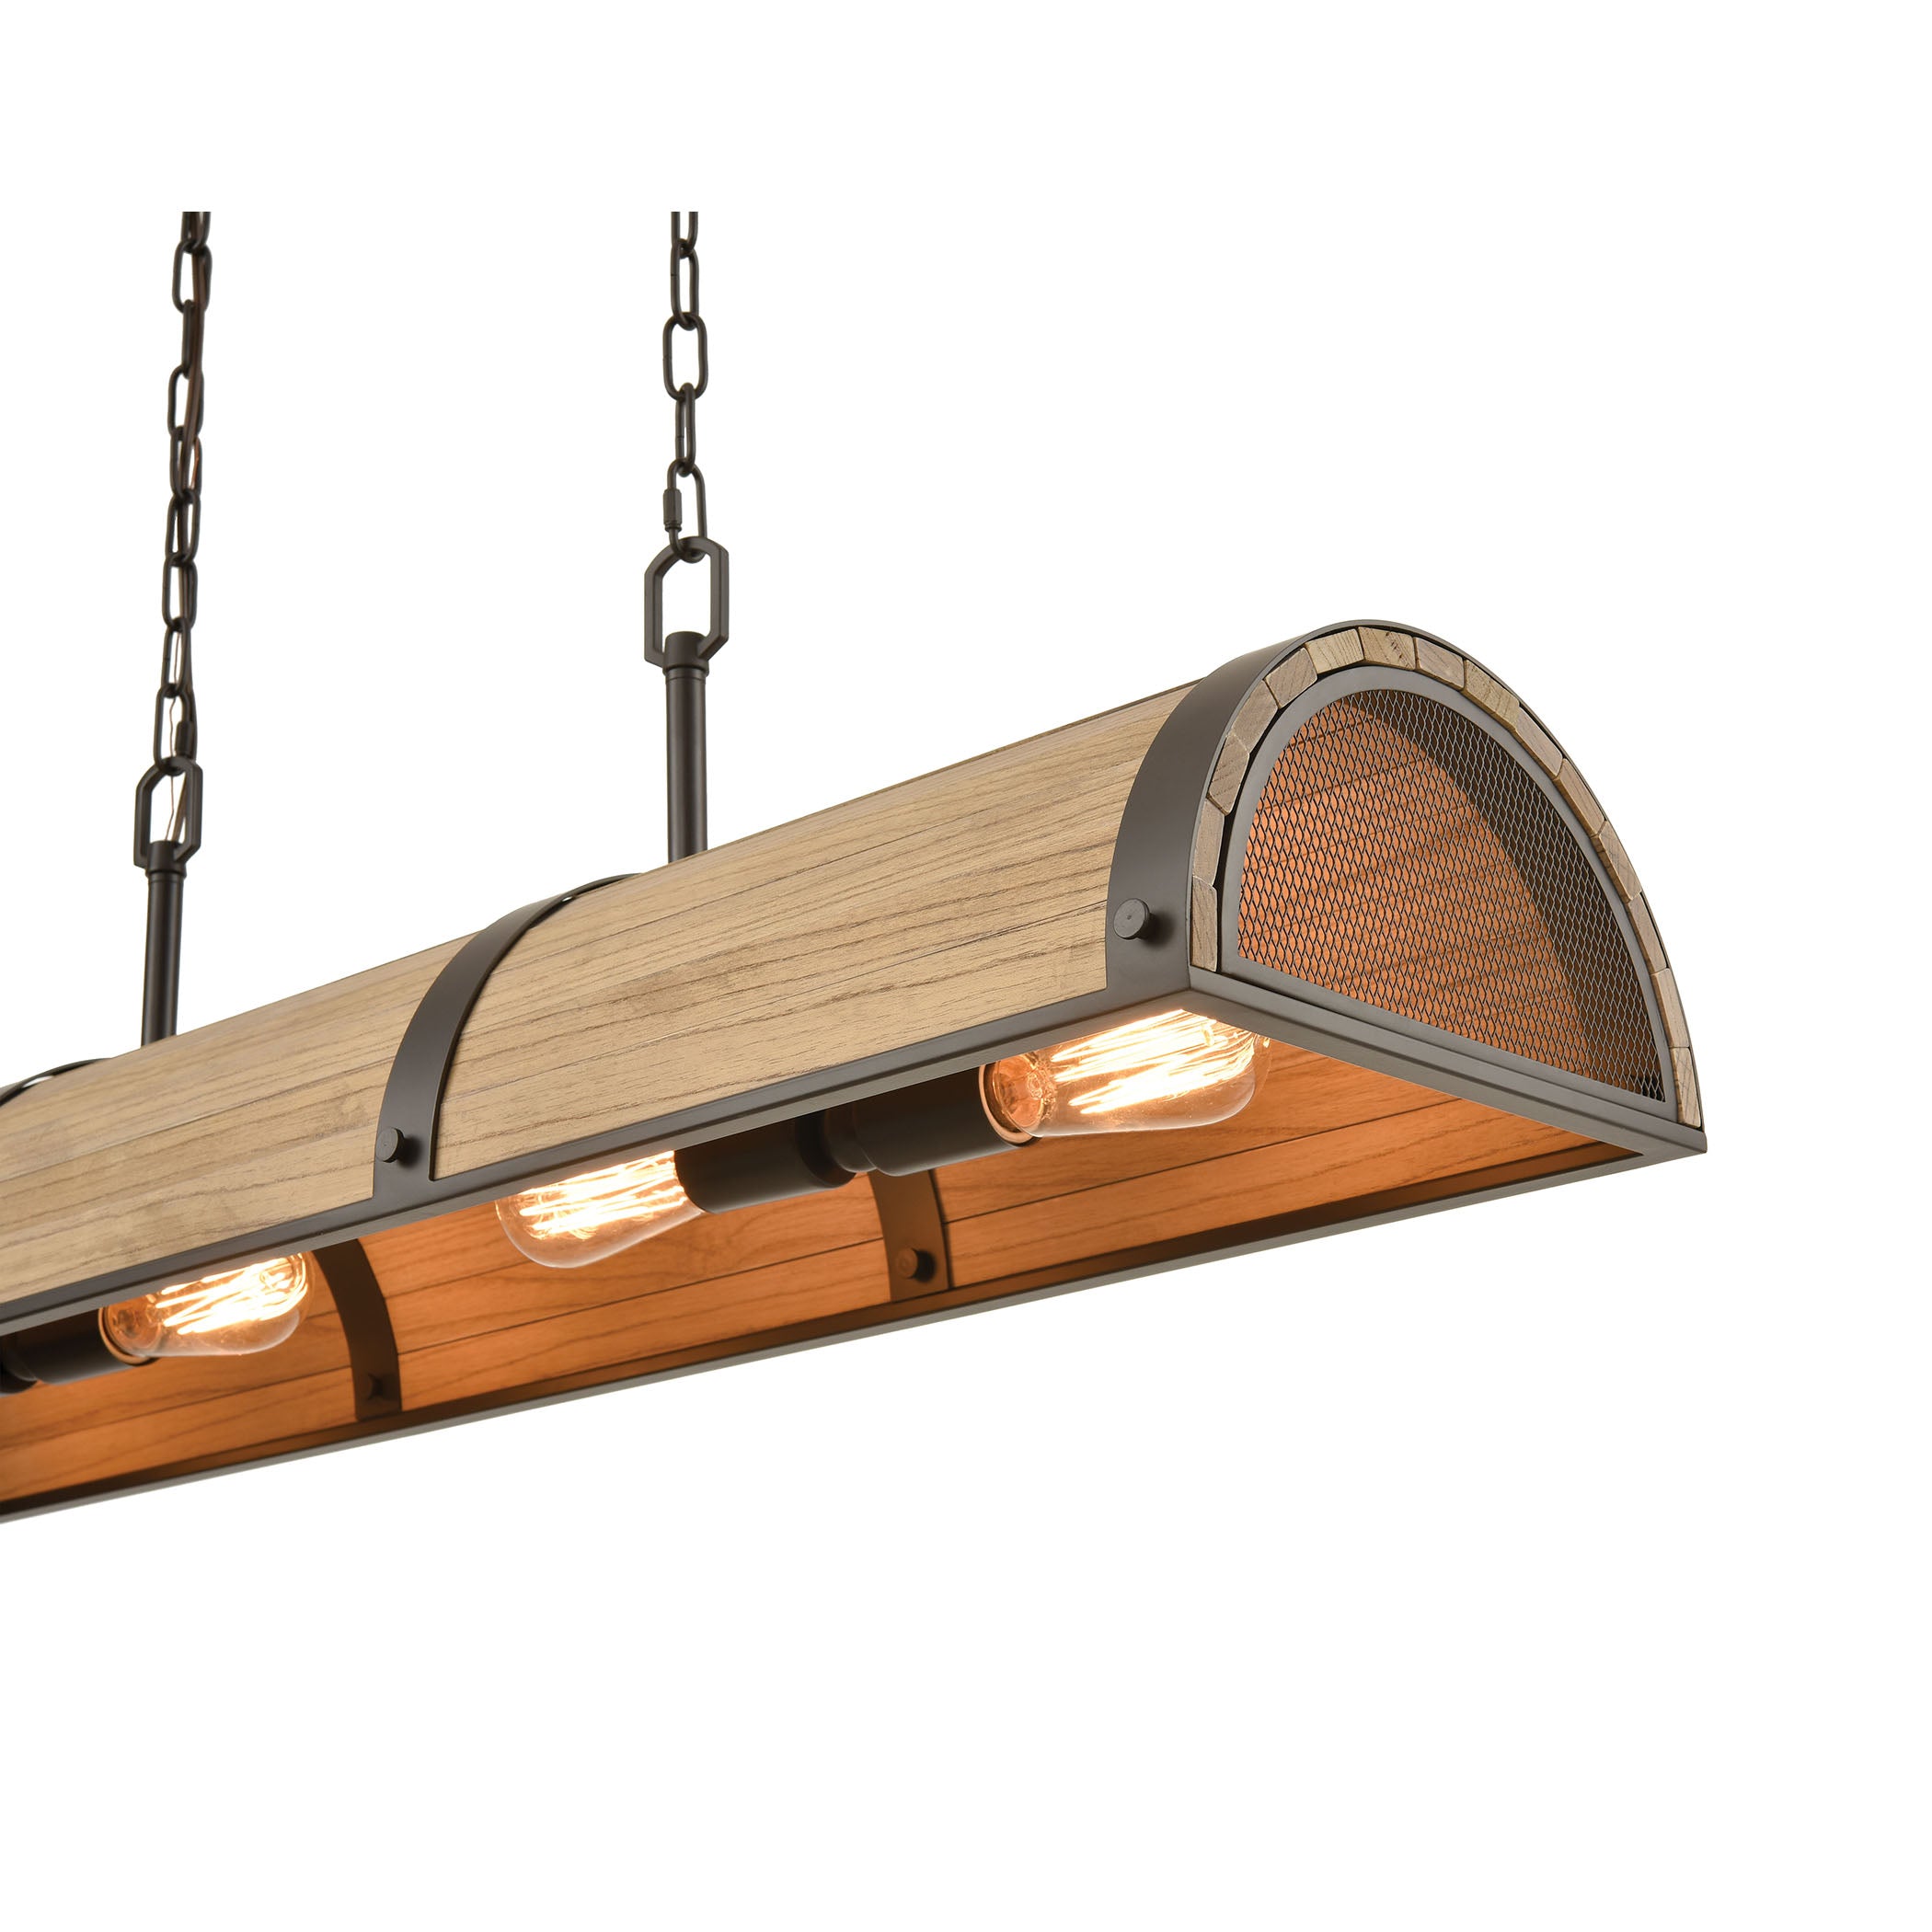 ELK Lighting 33365/4 Wooden Barrel 4-Light Island Light in Oil Rubbed Bronze with Slatted Wood Shade in Natural